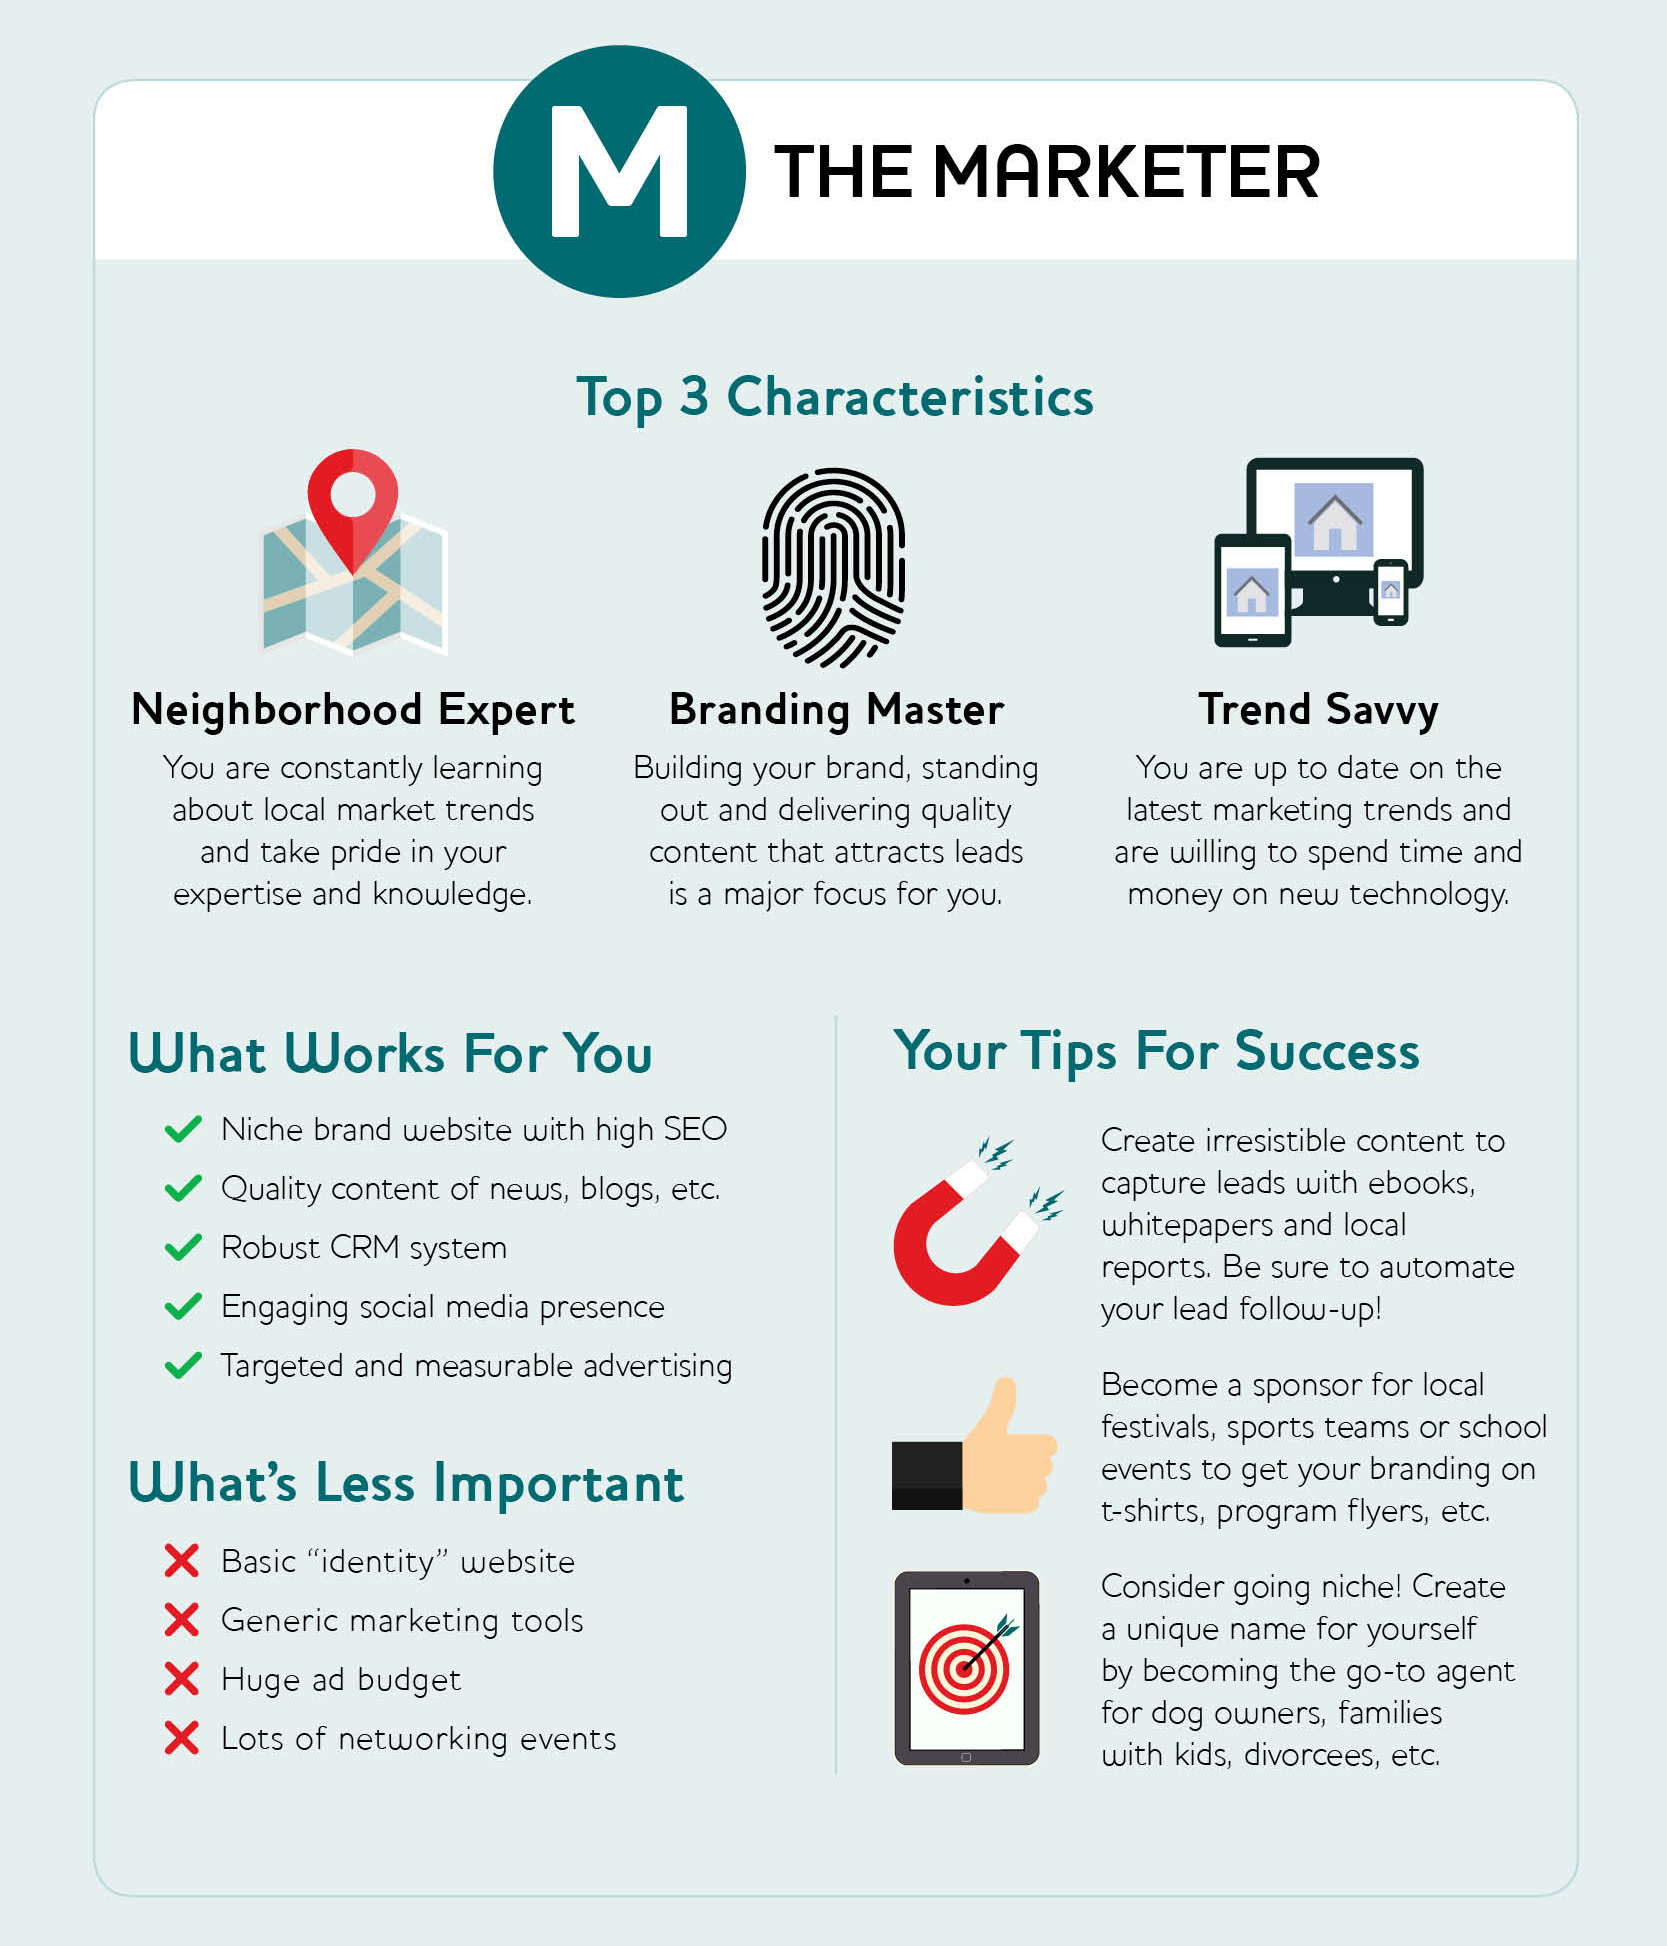 infographic: the marketer -- 3 main characteristics, what works best, tips for success